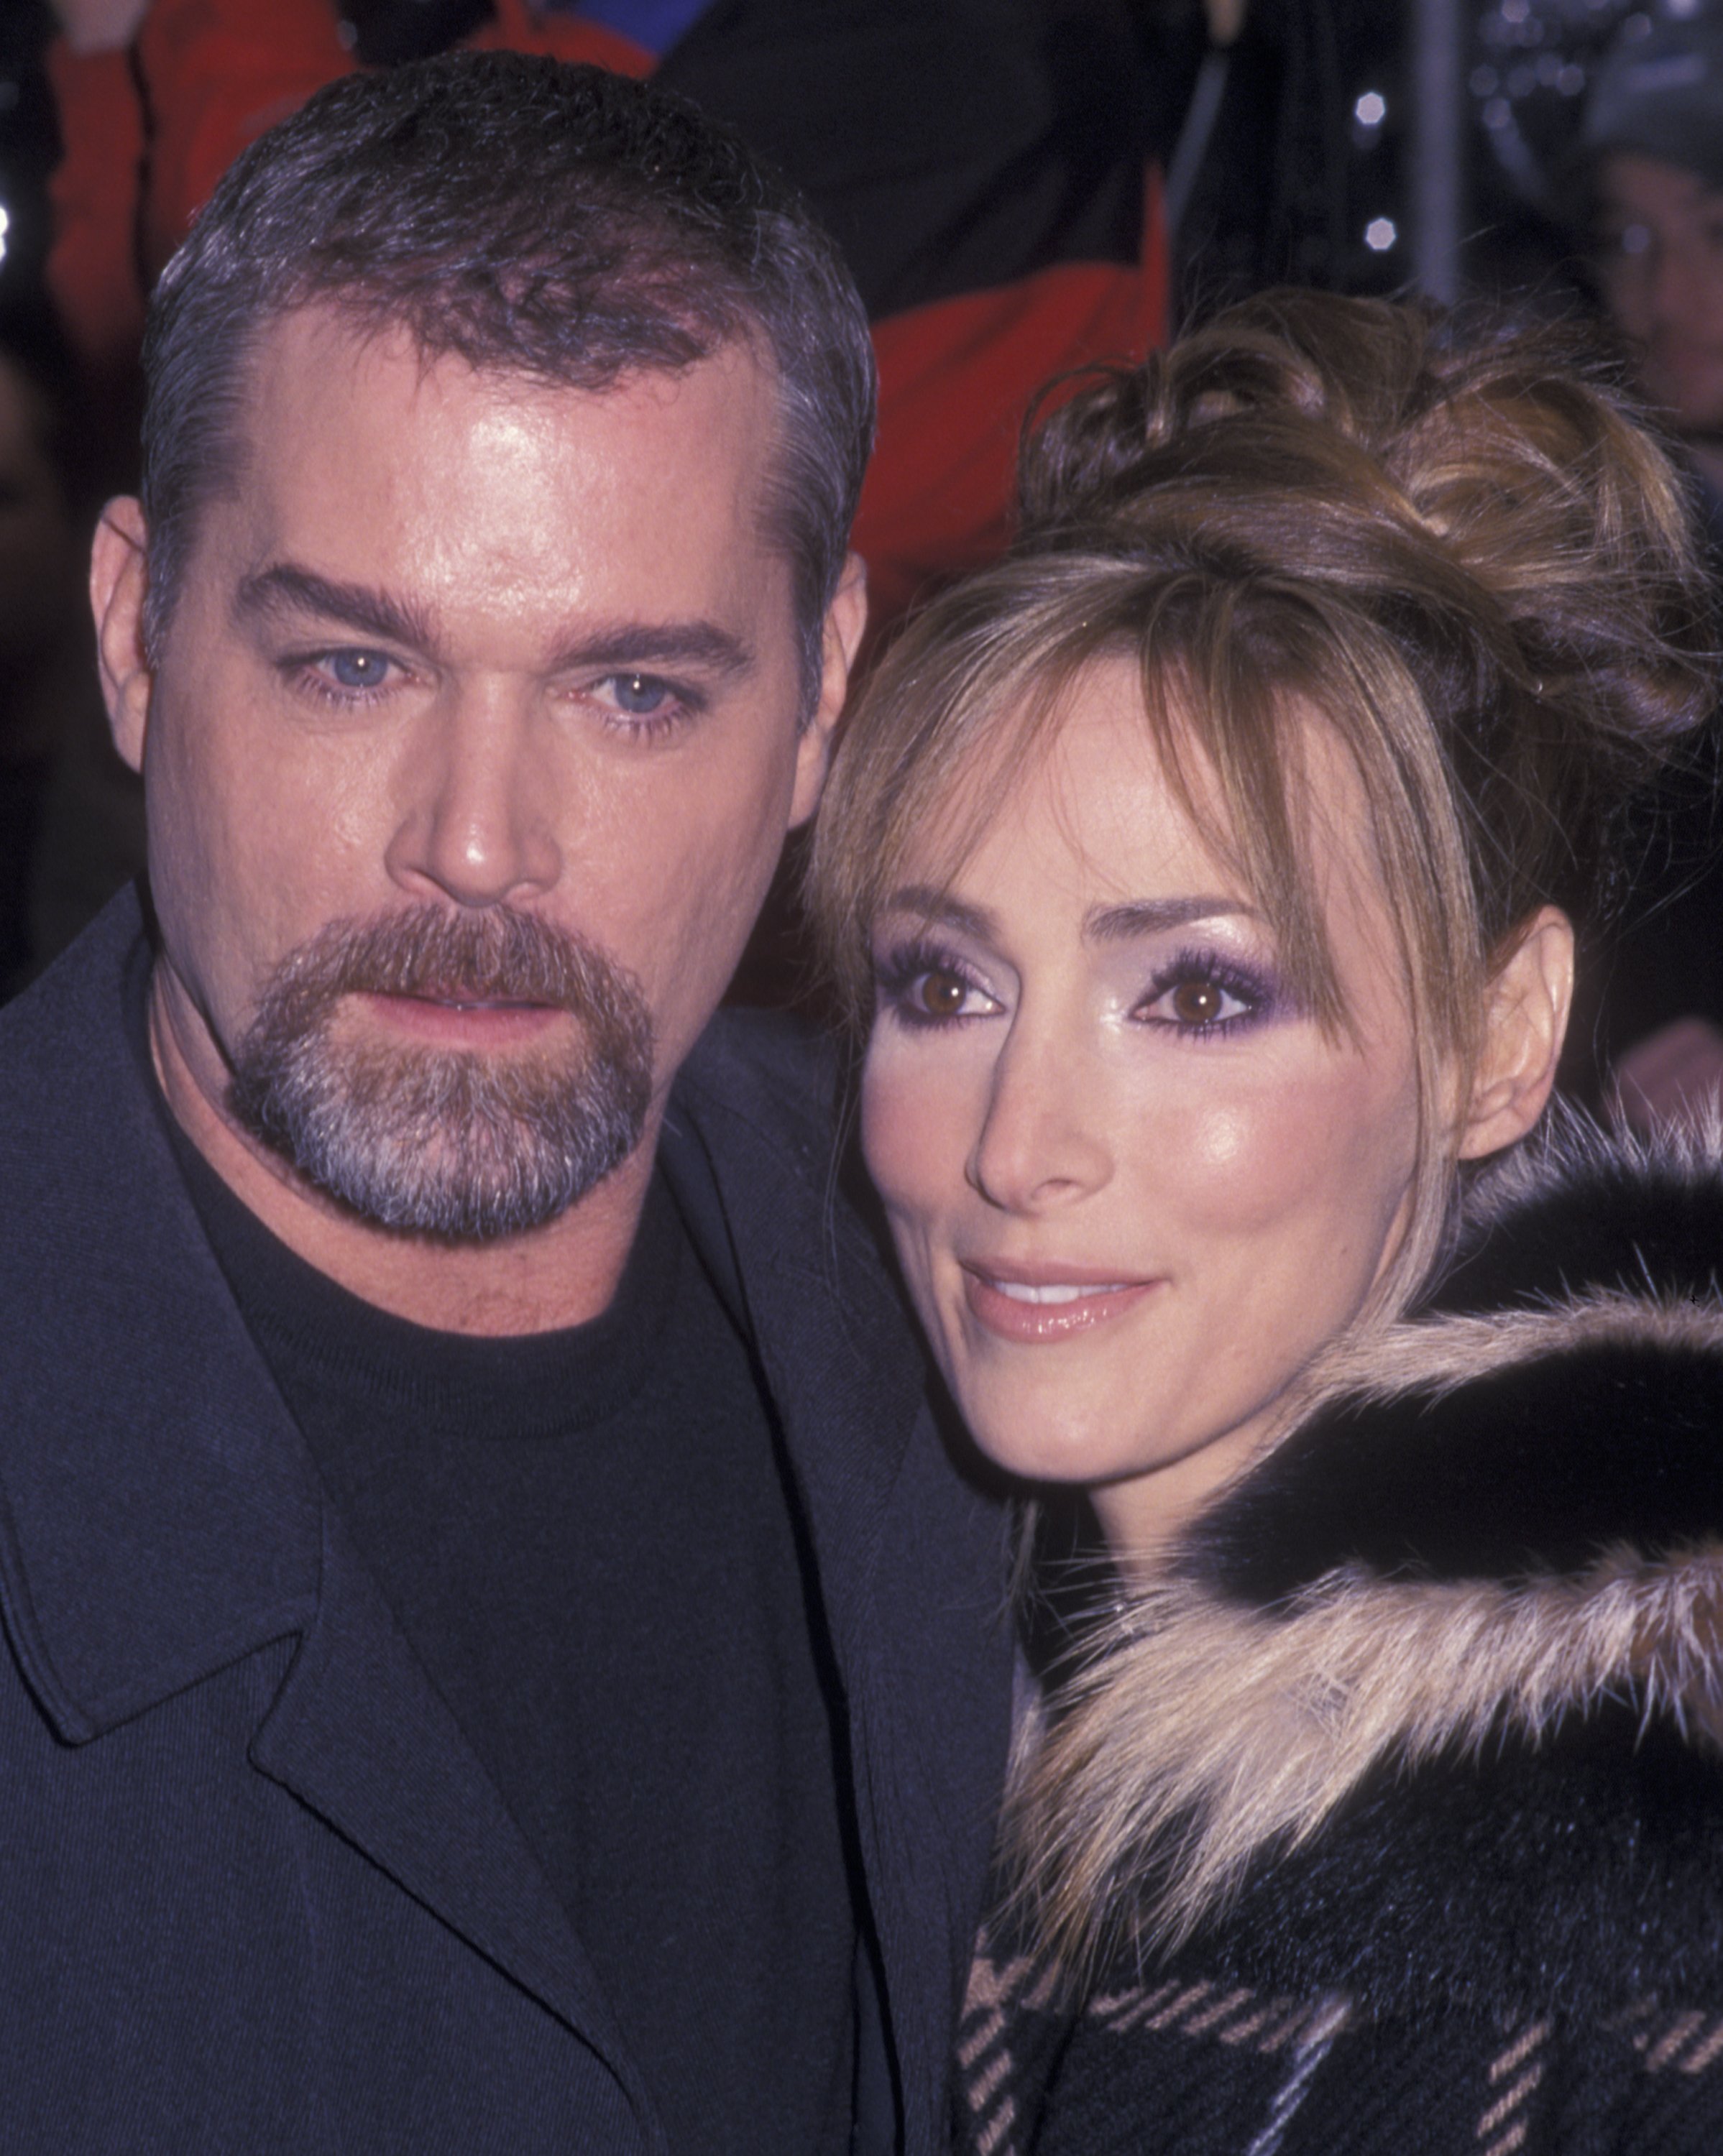 Ray Liotta and Michelle Grace at the premiere of "Hannibal" on February 5, 2001, in New York City. | Source: Ron Galella, Ltd./Ron Galella Collection/Getty Images